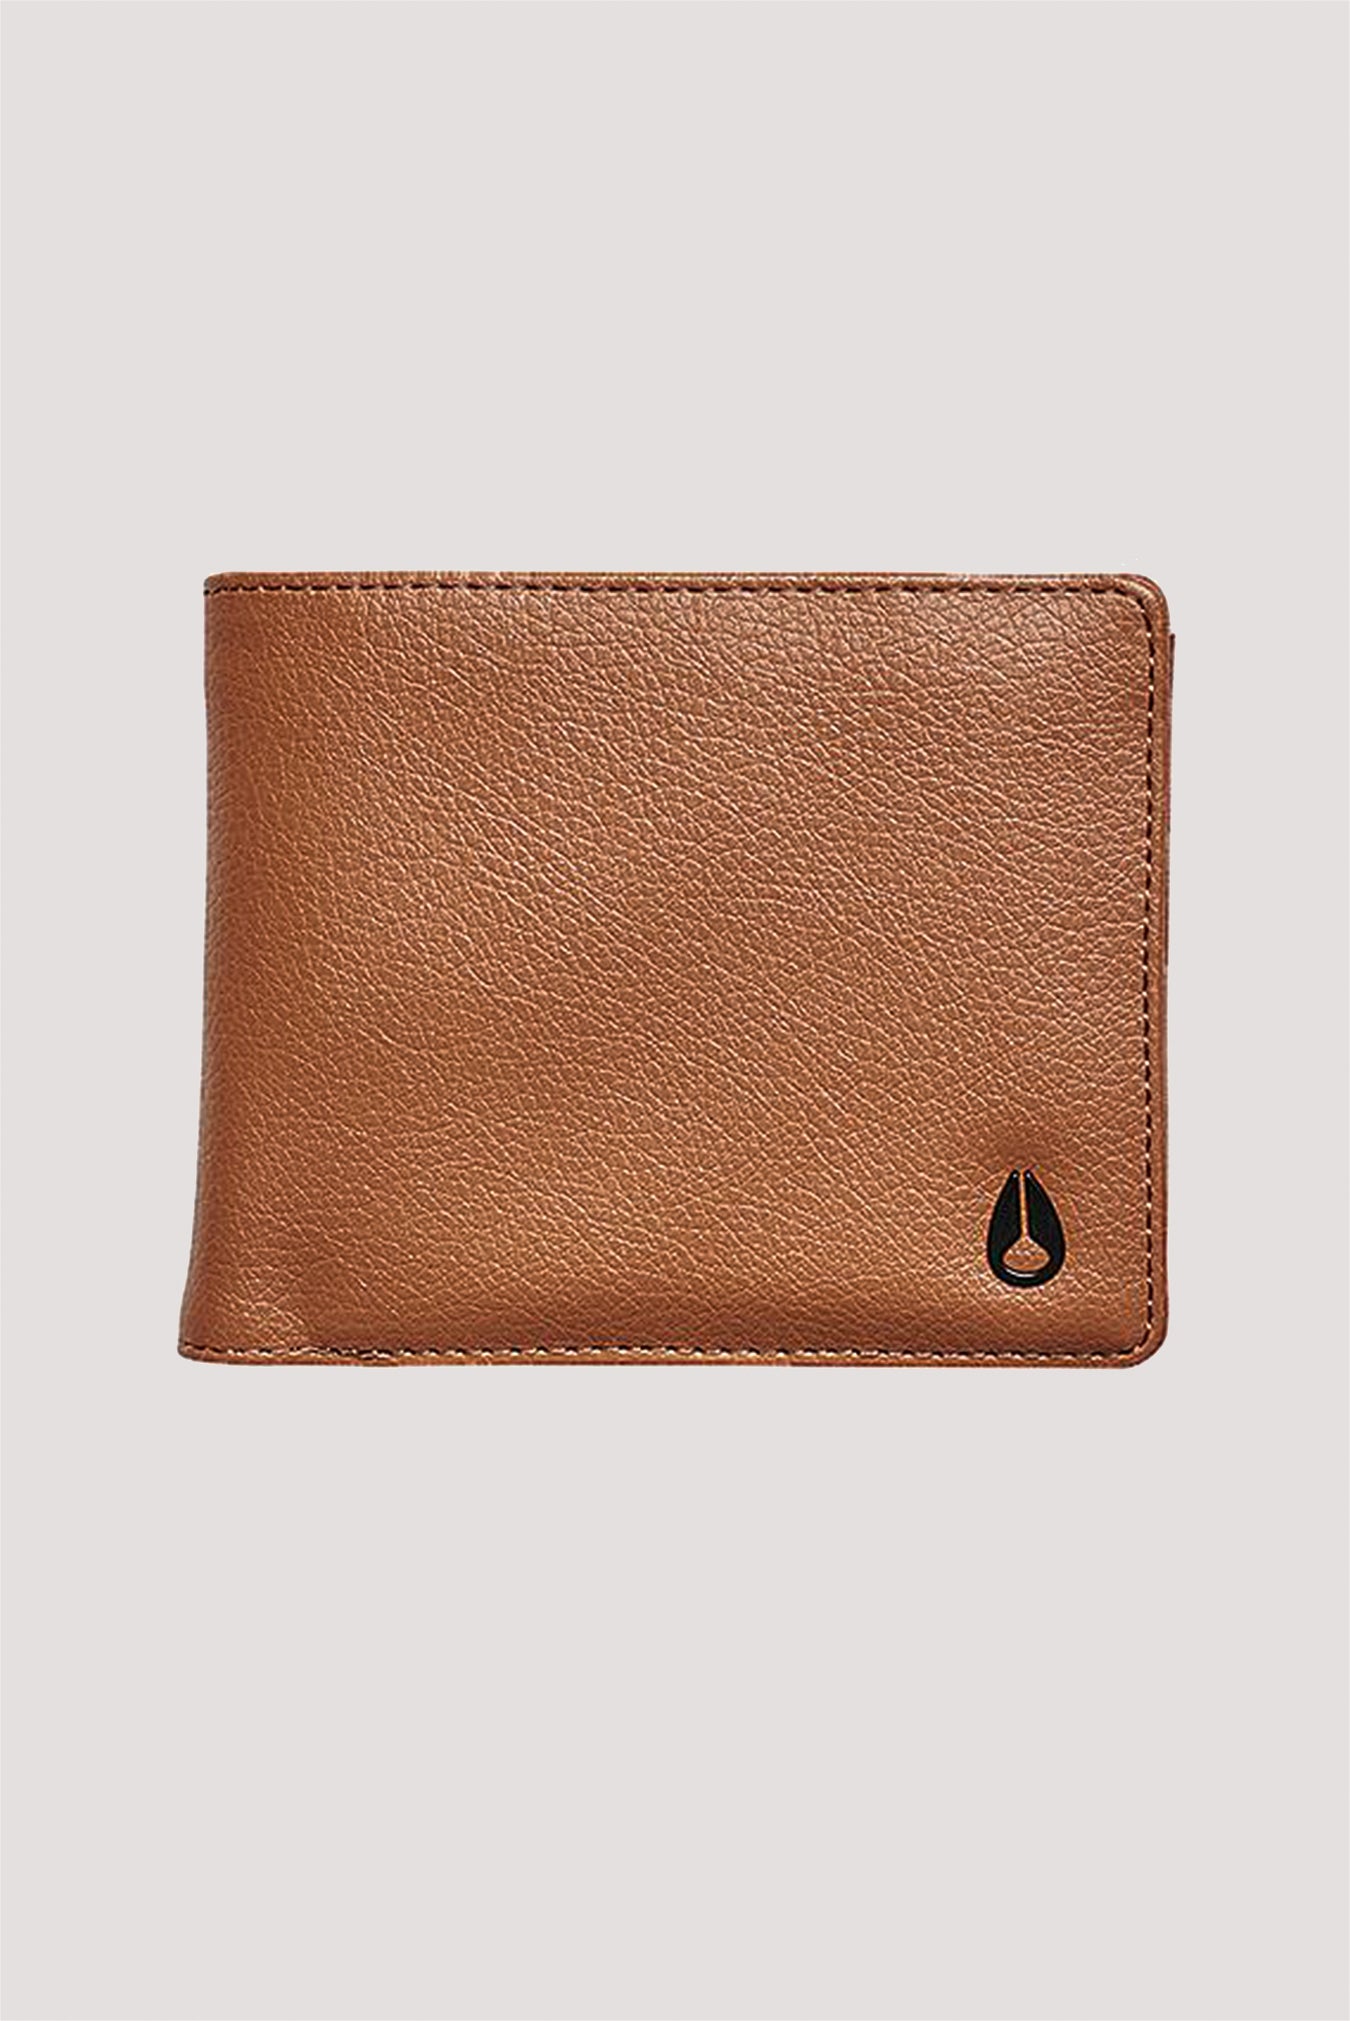 Pass Vegan Leather Coin Wallet | North Beach